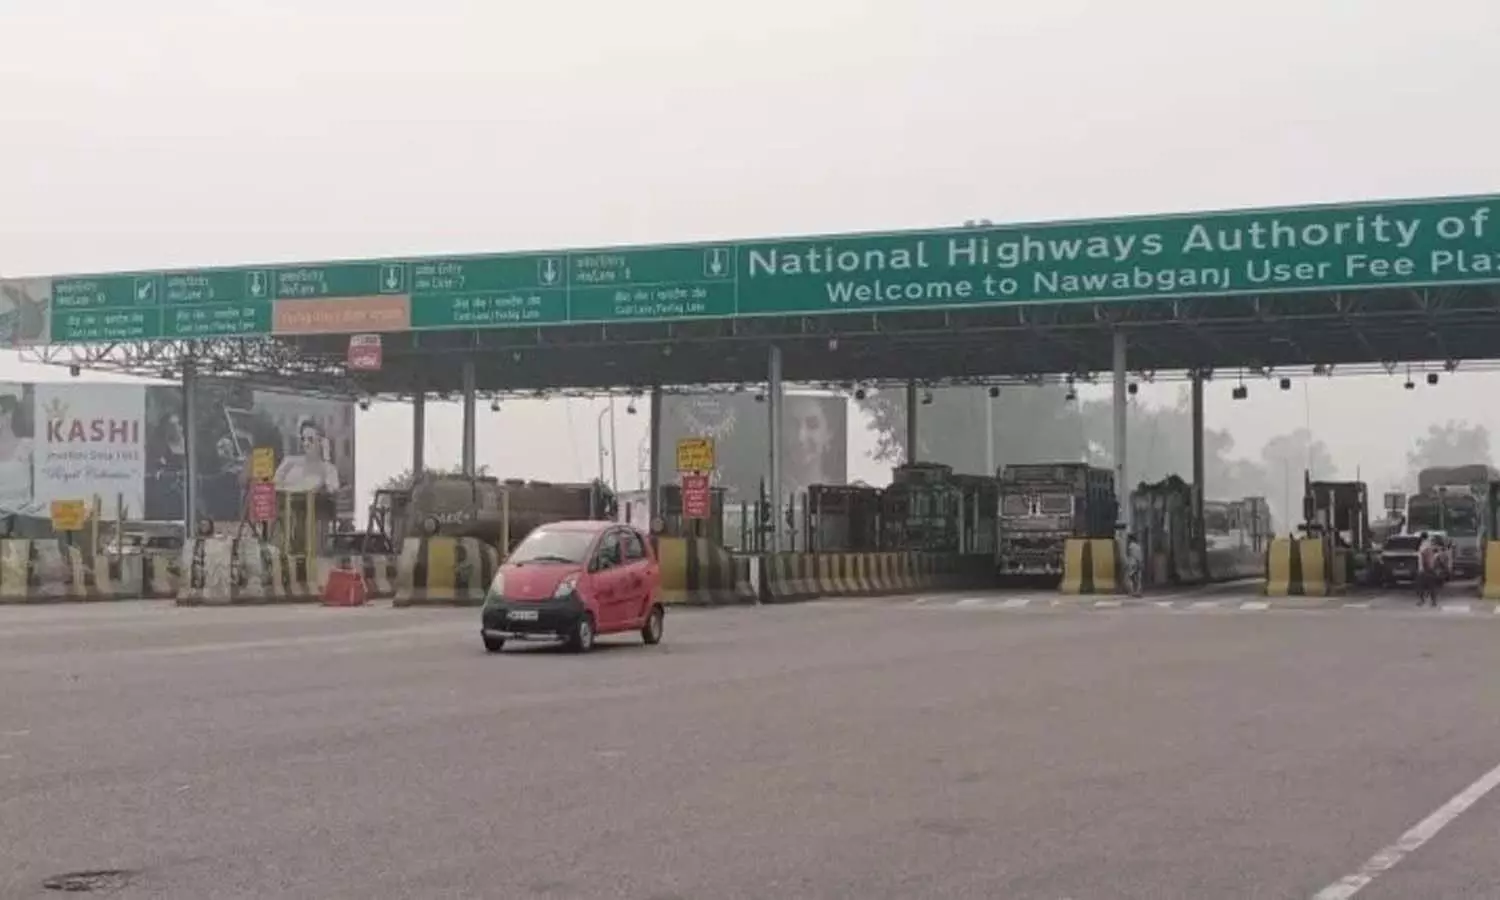 The car was parked in Lucknow, toll was cut in Nawabganj, peoples pockets were robbed!